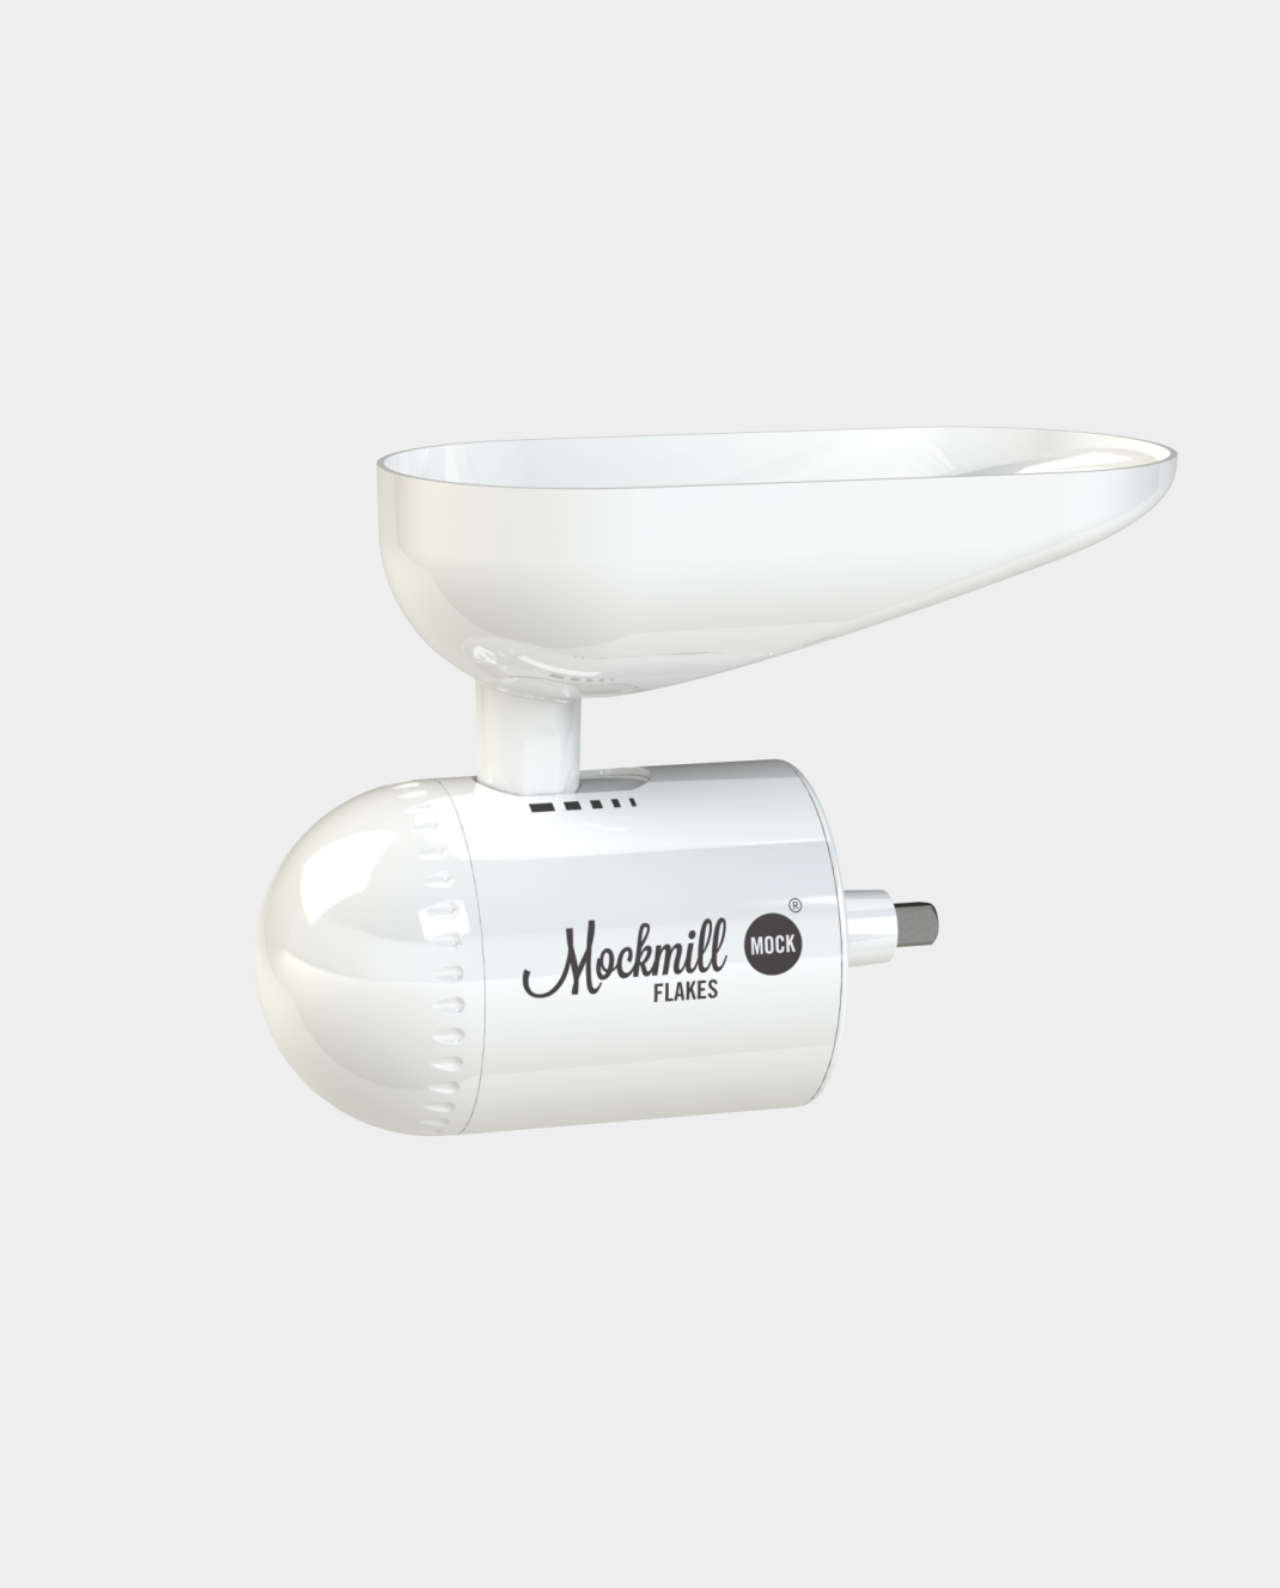 KitchenAid Grain Mill Attachment Review and Benefits of Grinding